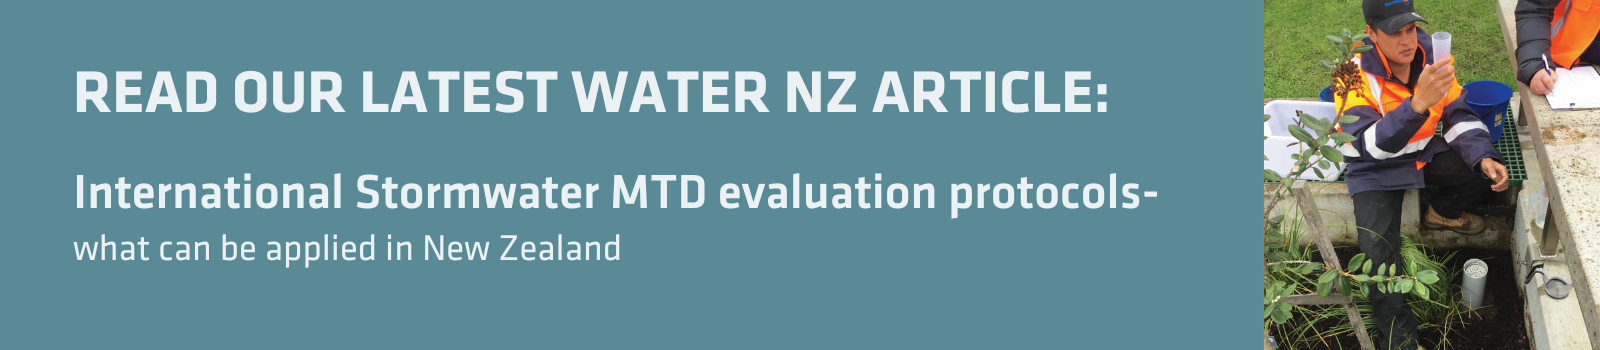 Water NZ Article banner image 2